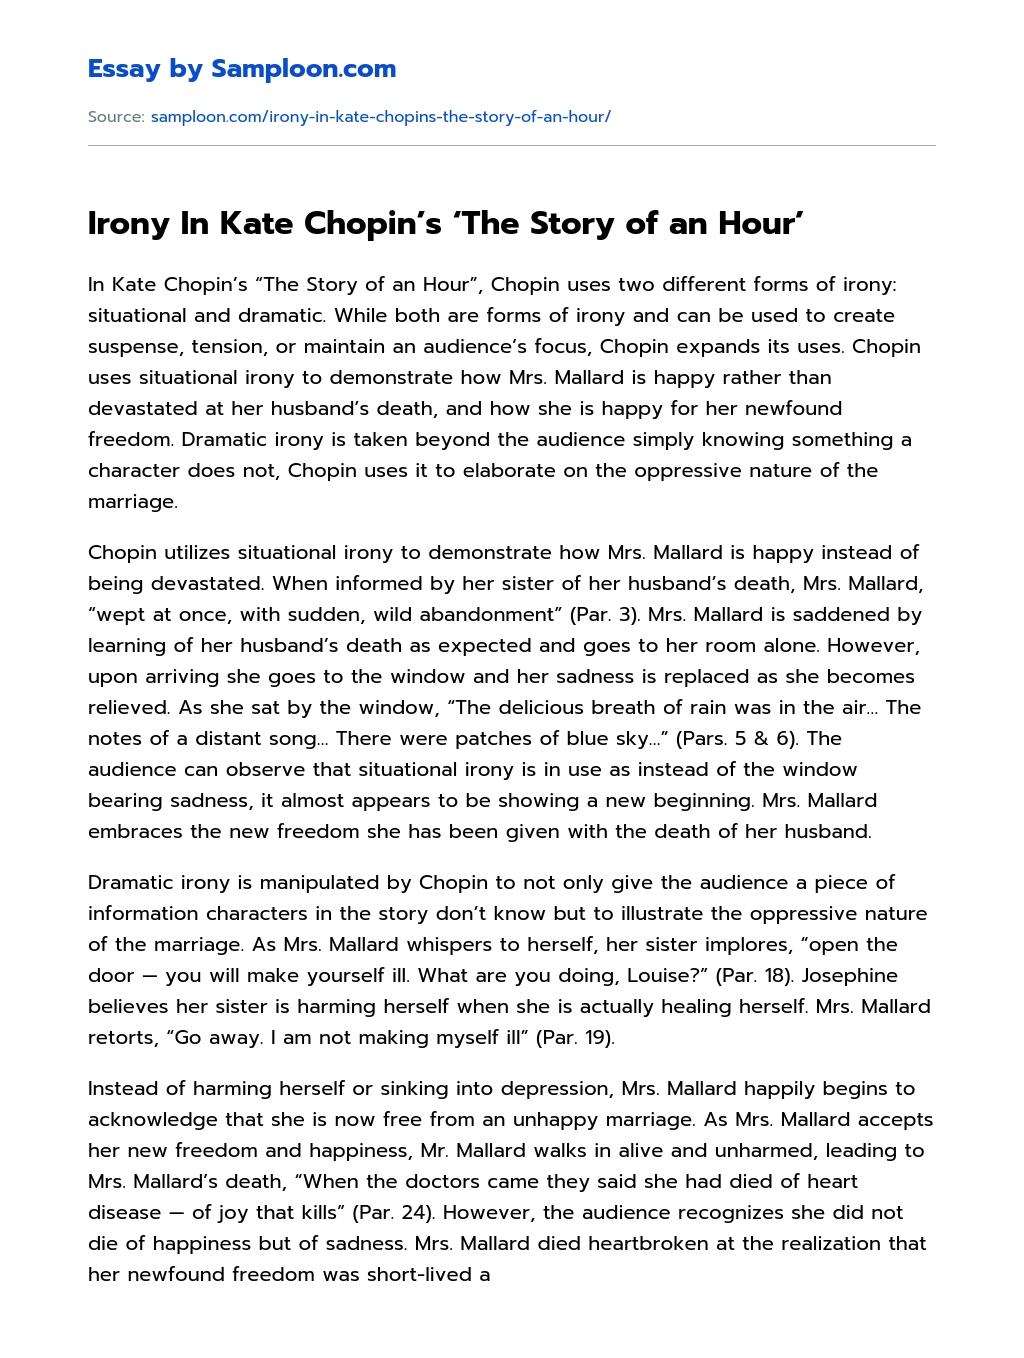 Irony In Kate Chopin’s ‘The Story of an Hour’ Analytical Essay essay